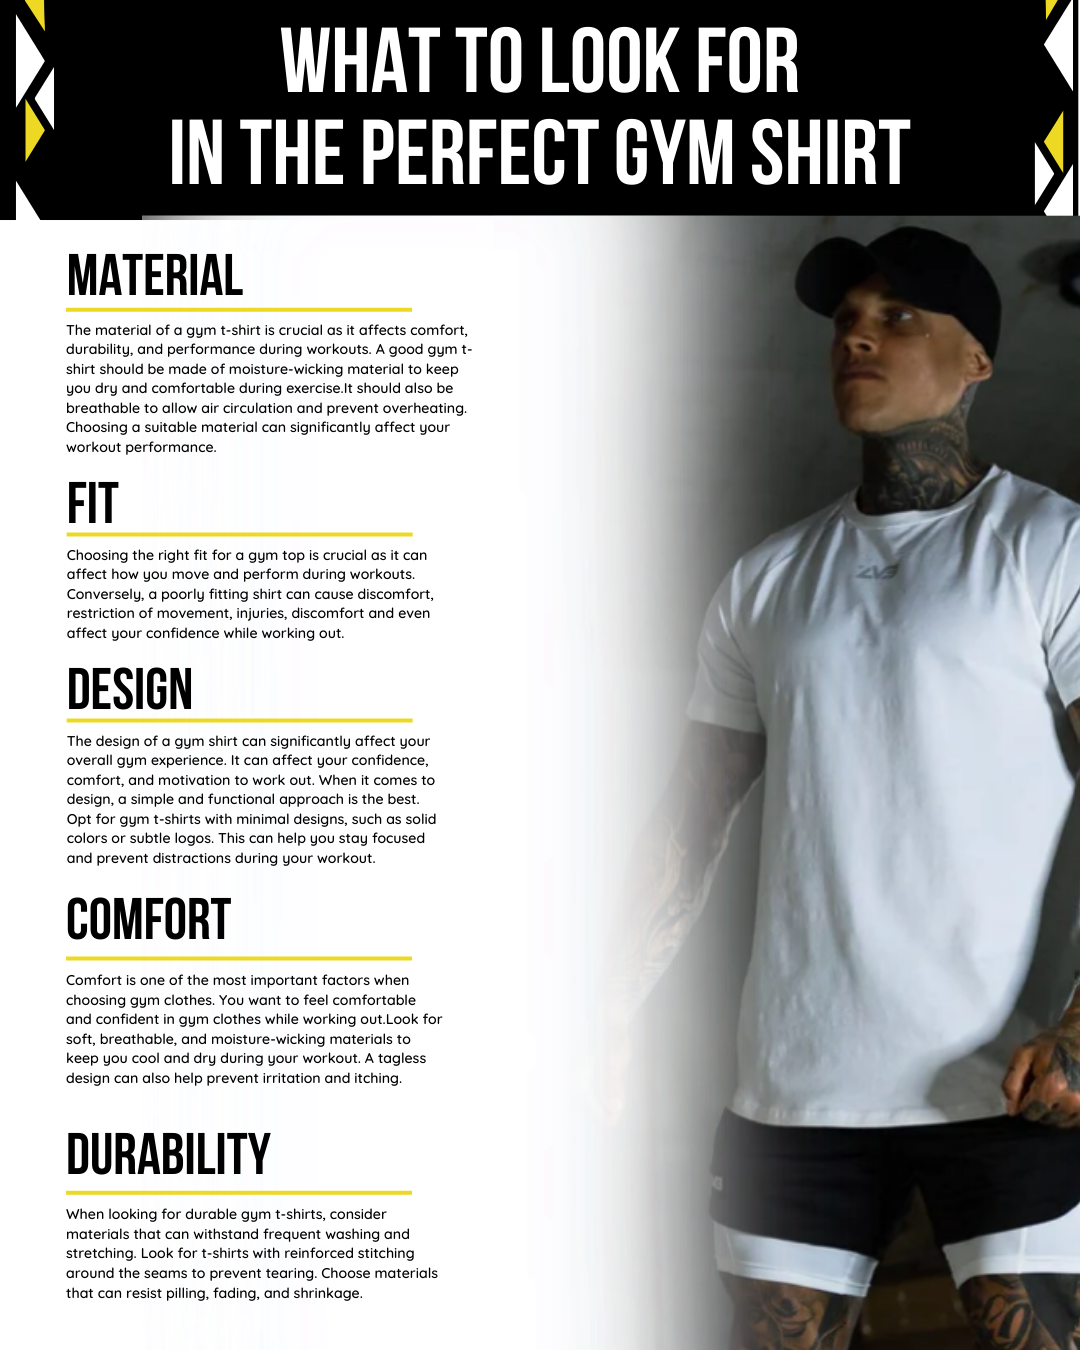 gym clothes, men's gym clothes, gym tops, fitness goals, style, cool, training, clothing, body fit, gym tops, sweat, training, shop, join, page, restrictions, reach, enjoy